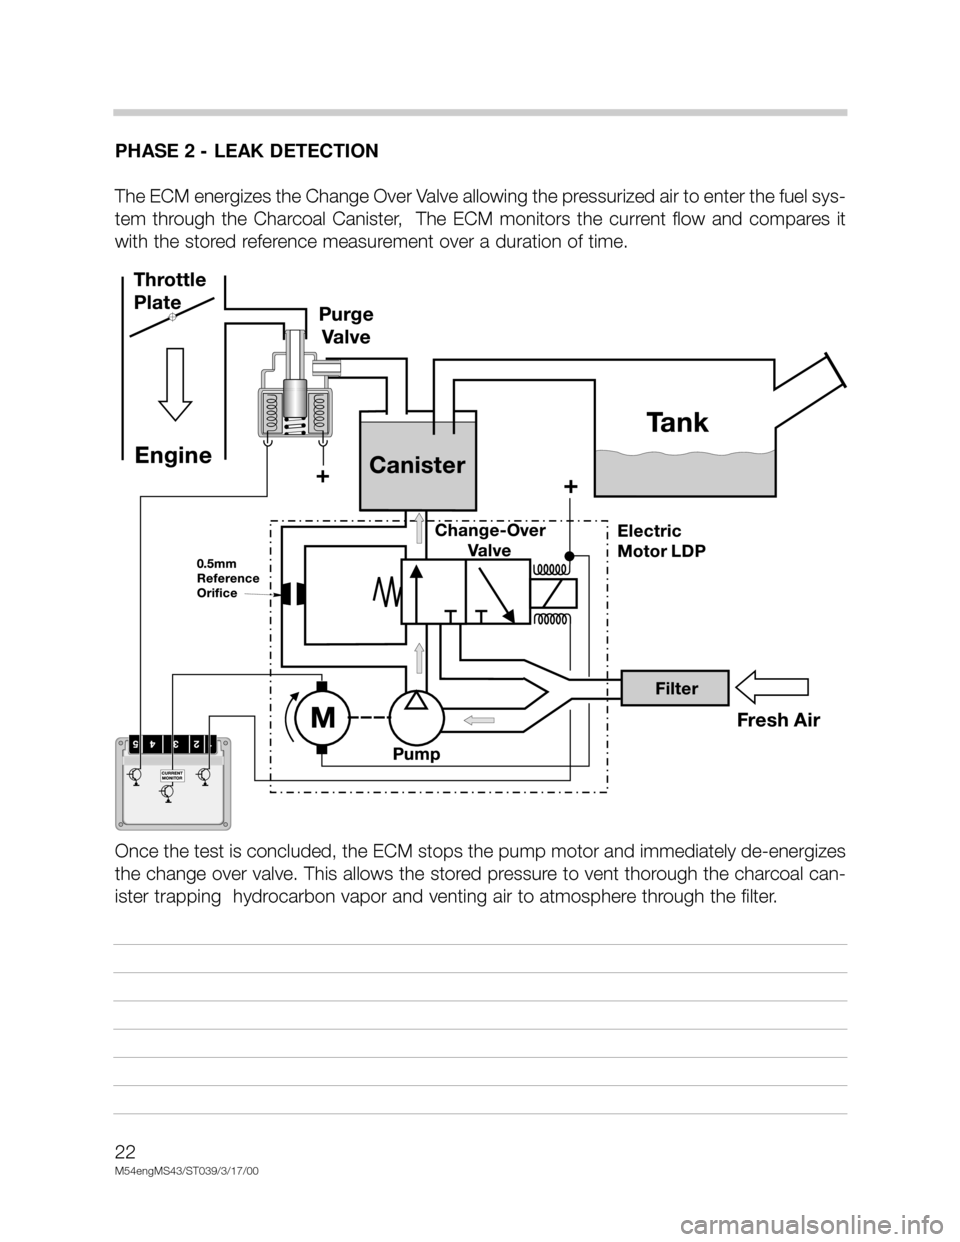 BMW X5 2005 E53 M54 Engine Owners Manual 22
M54engMS43/ST039/3/17/00
PHASE 2 - LEAK DETECTION
The ECM energizes the Change Over Valve allowing the pressurized air to enter the fuel sys-
tem  through  the  Charcoal  Canister,    The  ECM  mon